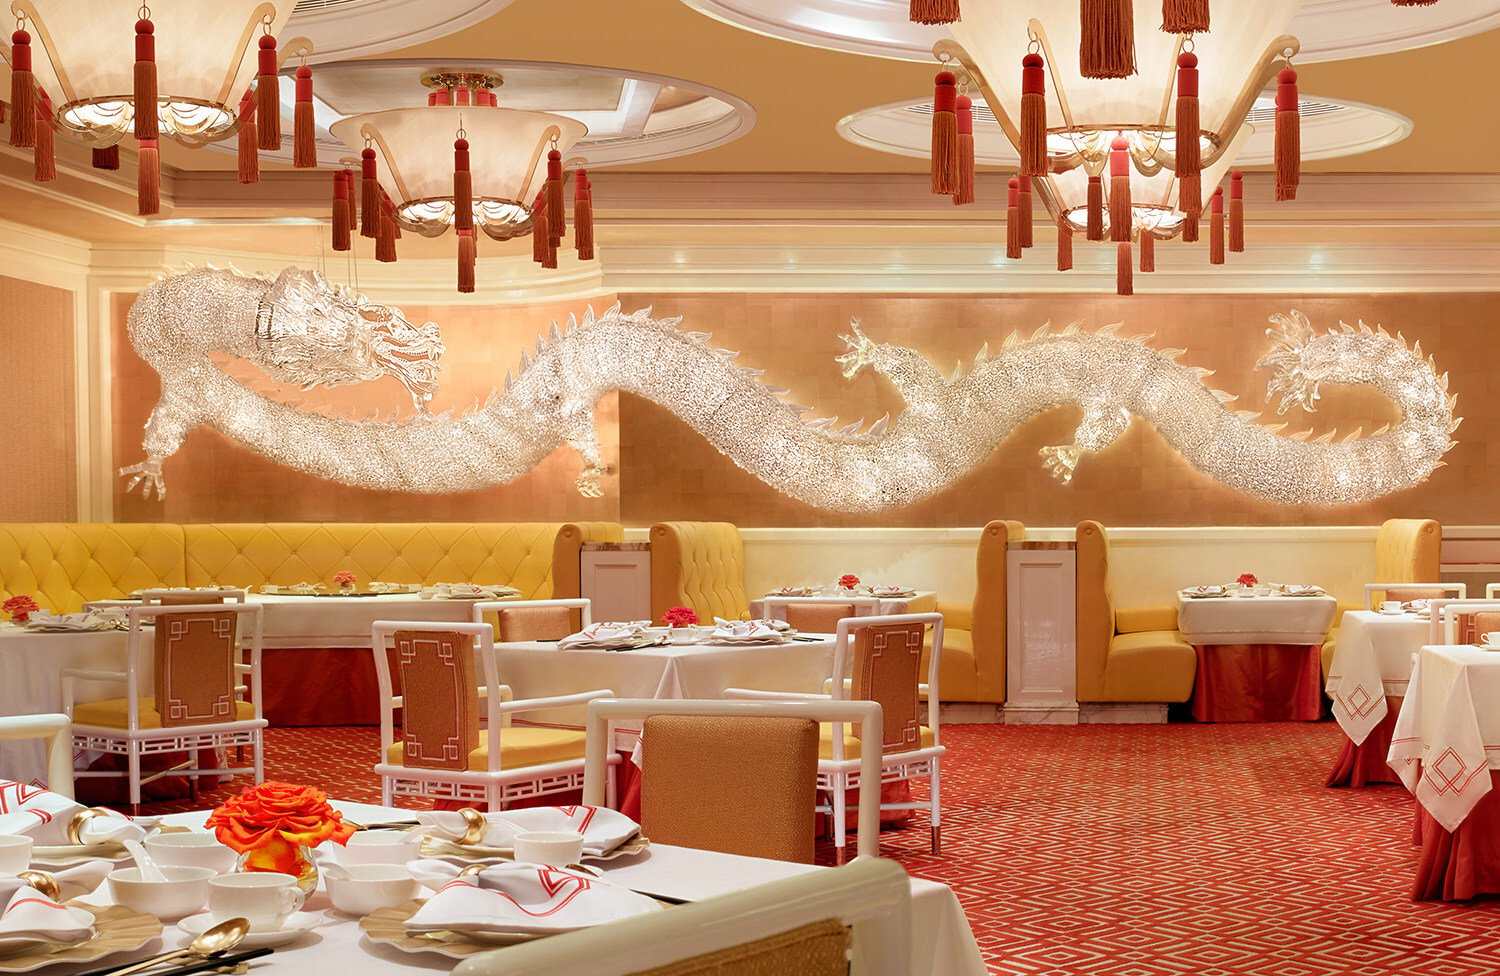 The 90,000-piece crystal dragon on the wall is an eye-catcher. Photo: Wing Lei